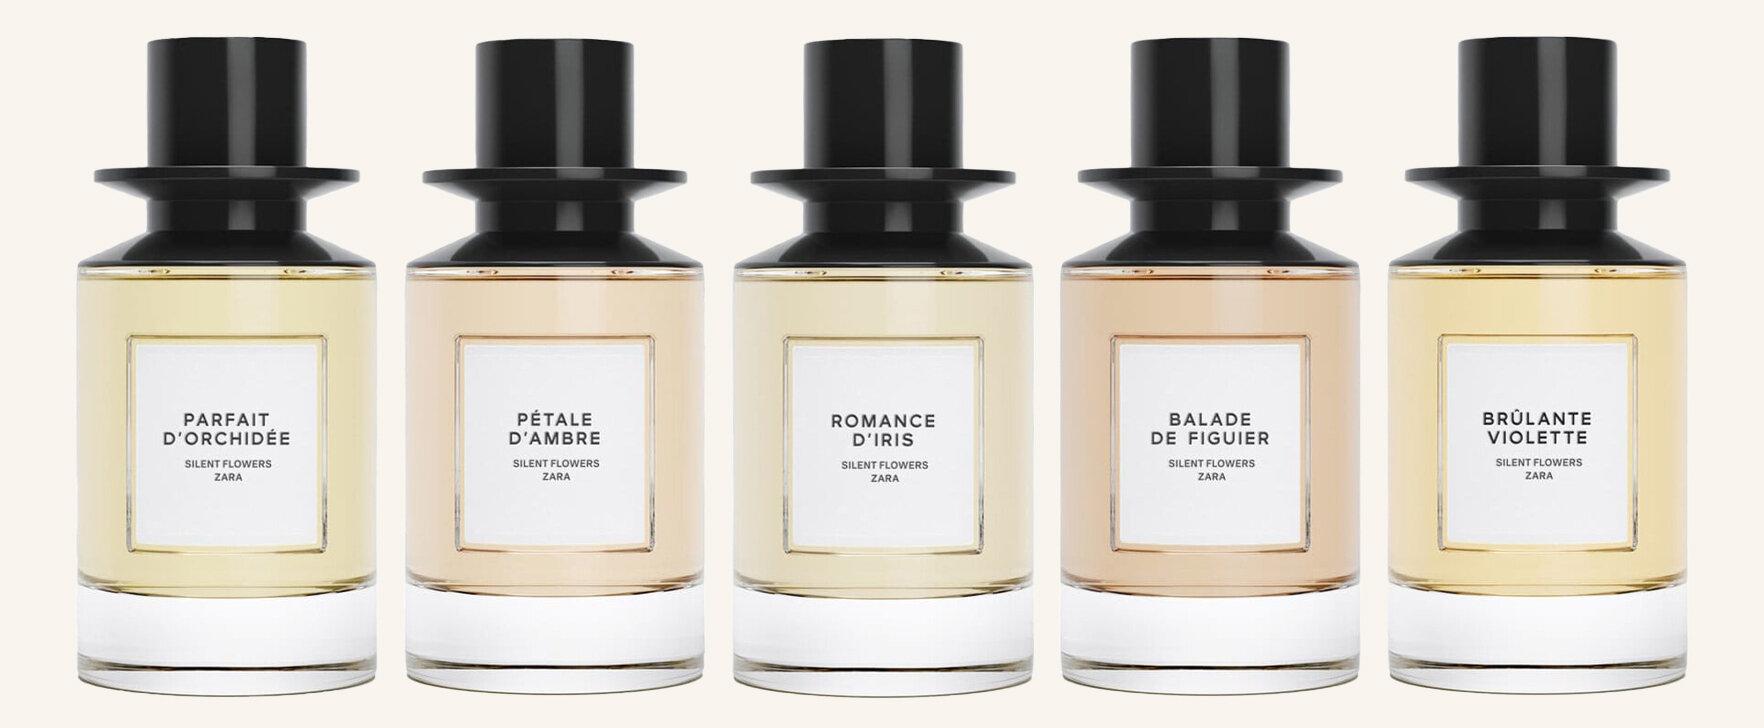 The New Silent Flowers Collection From Zara: A Scented Journey Through the World of Flowers